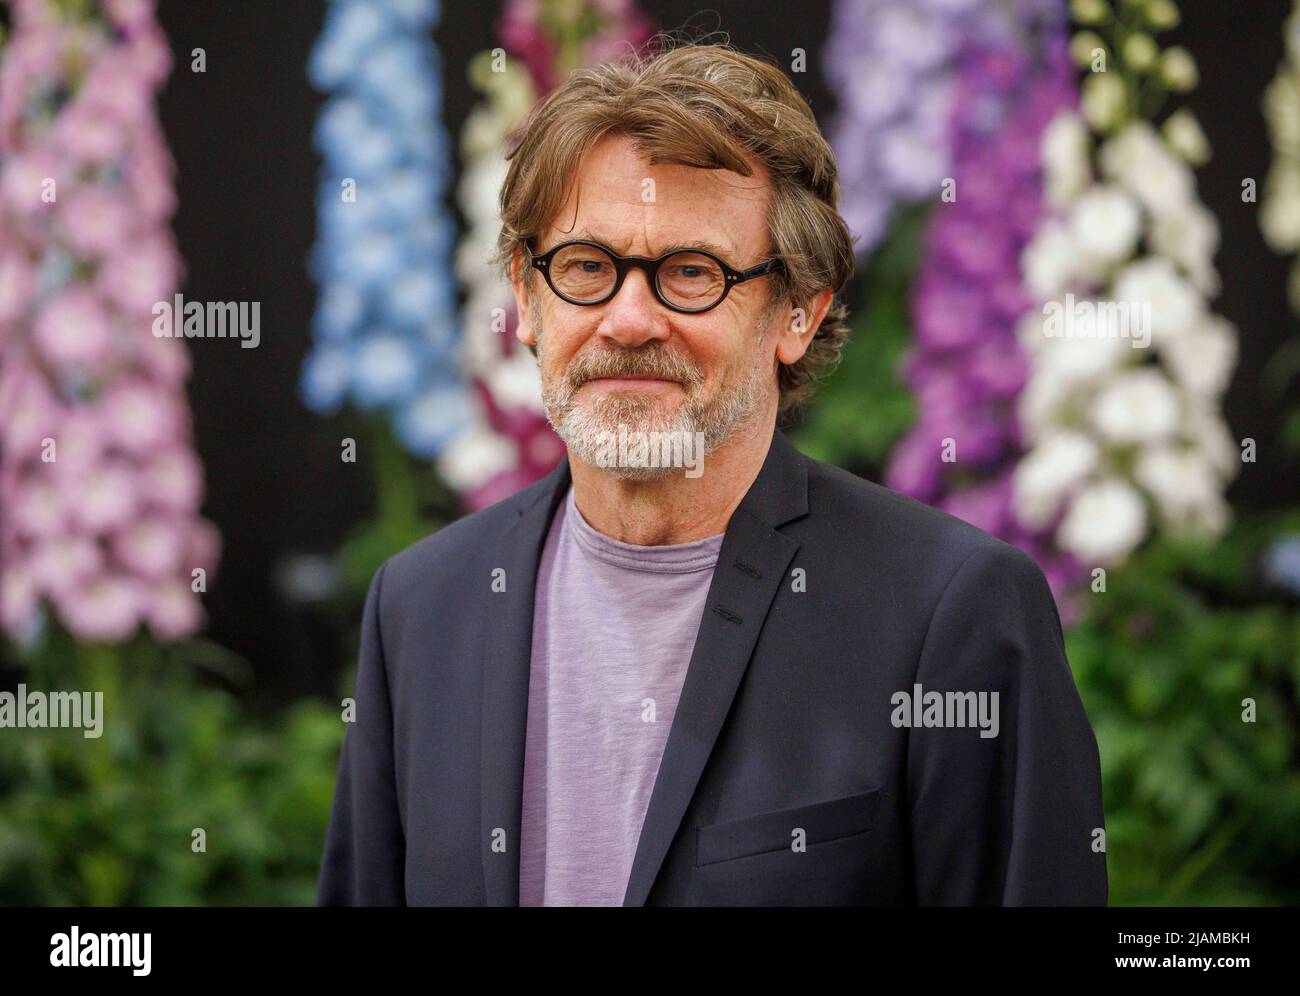 Nigel Slater, Food writer, Journalist and broadcaster, at the RHS Chelsea Flower Show. Stock Photo